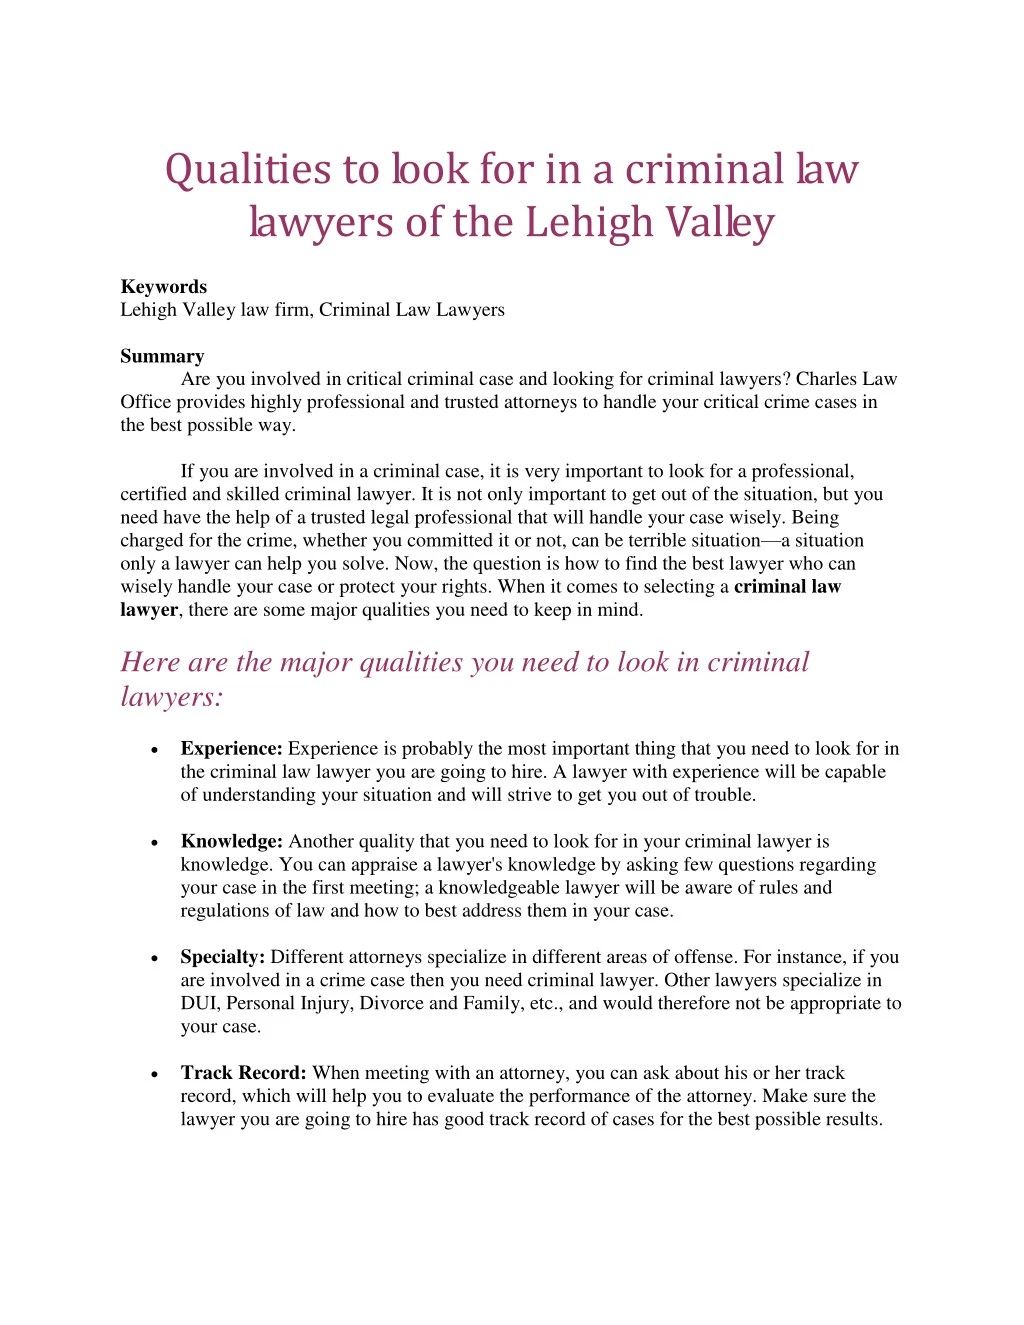 qualities to look for in a criminal law lawyers